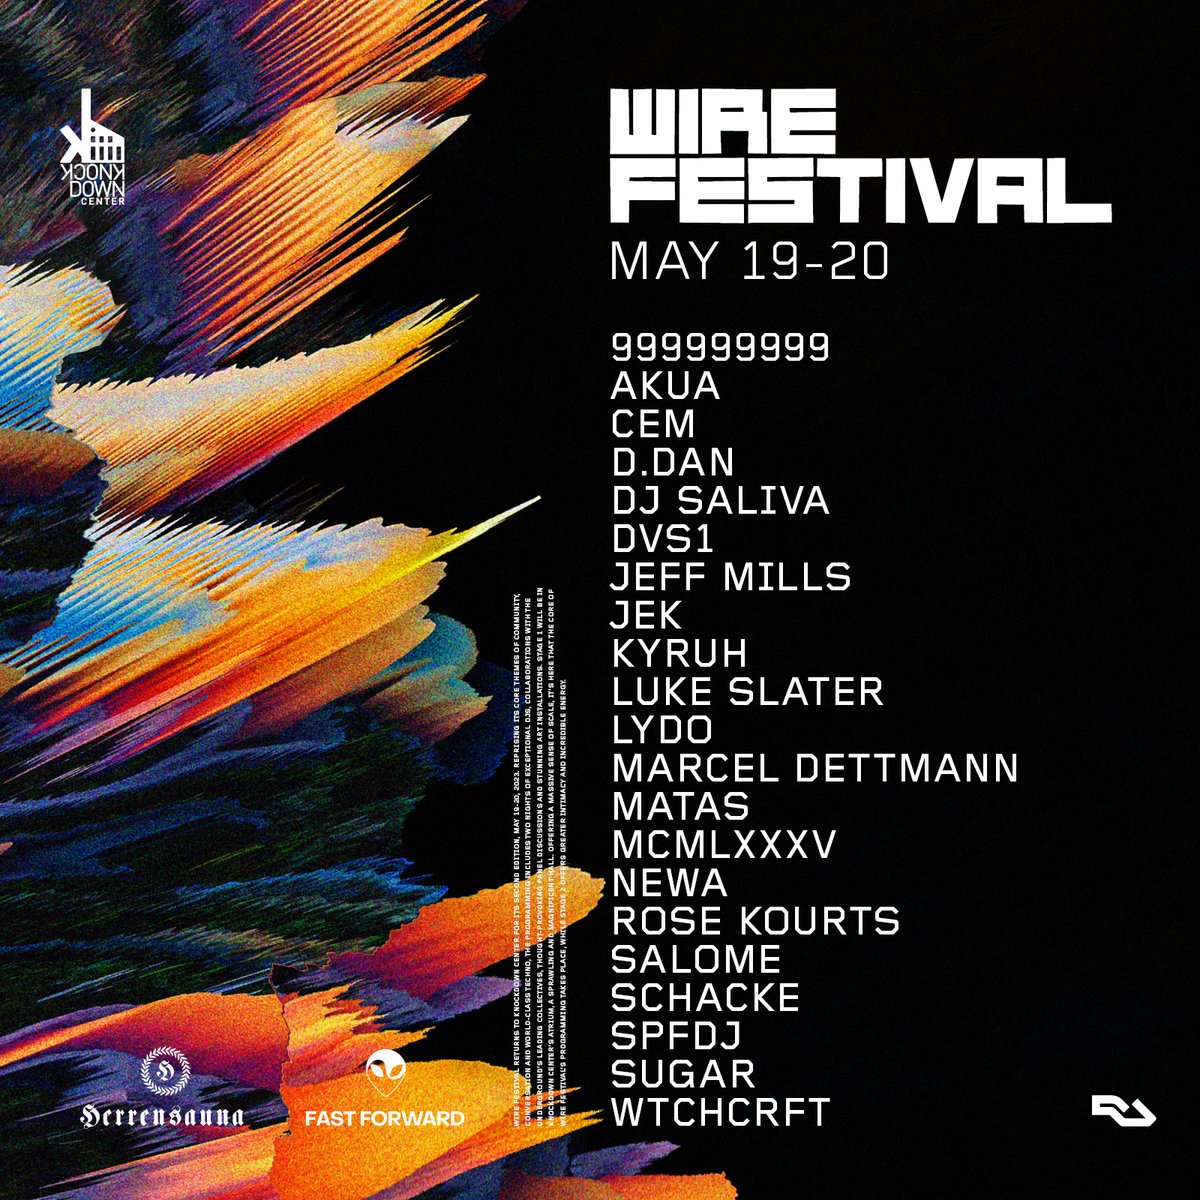 WIRE FESTIVAL returns for its second edition. wirefestival.com